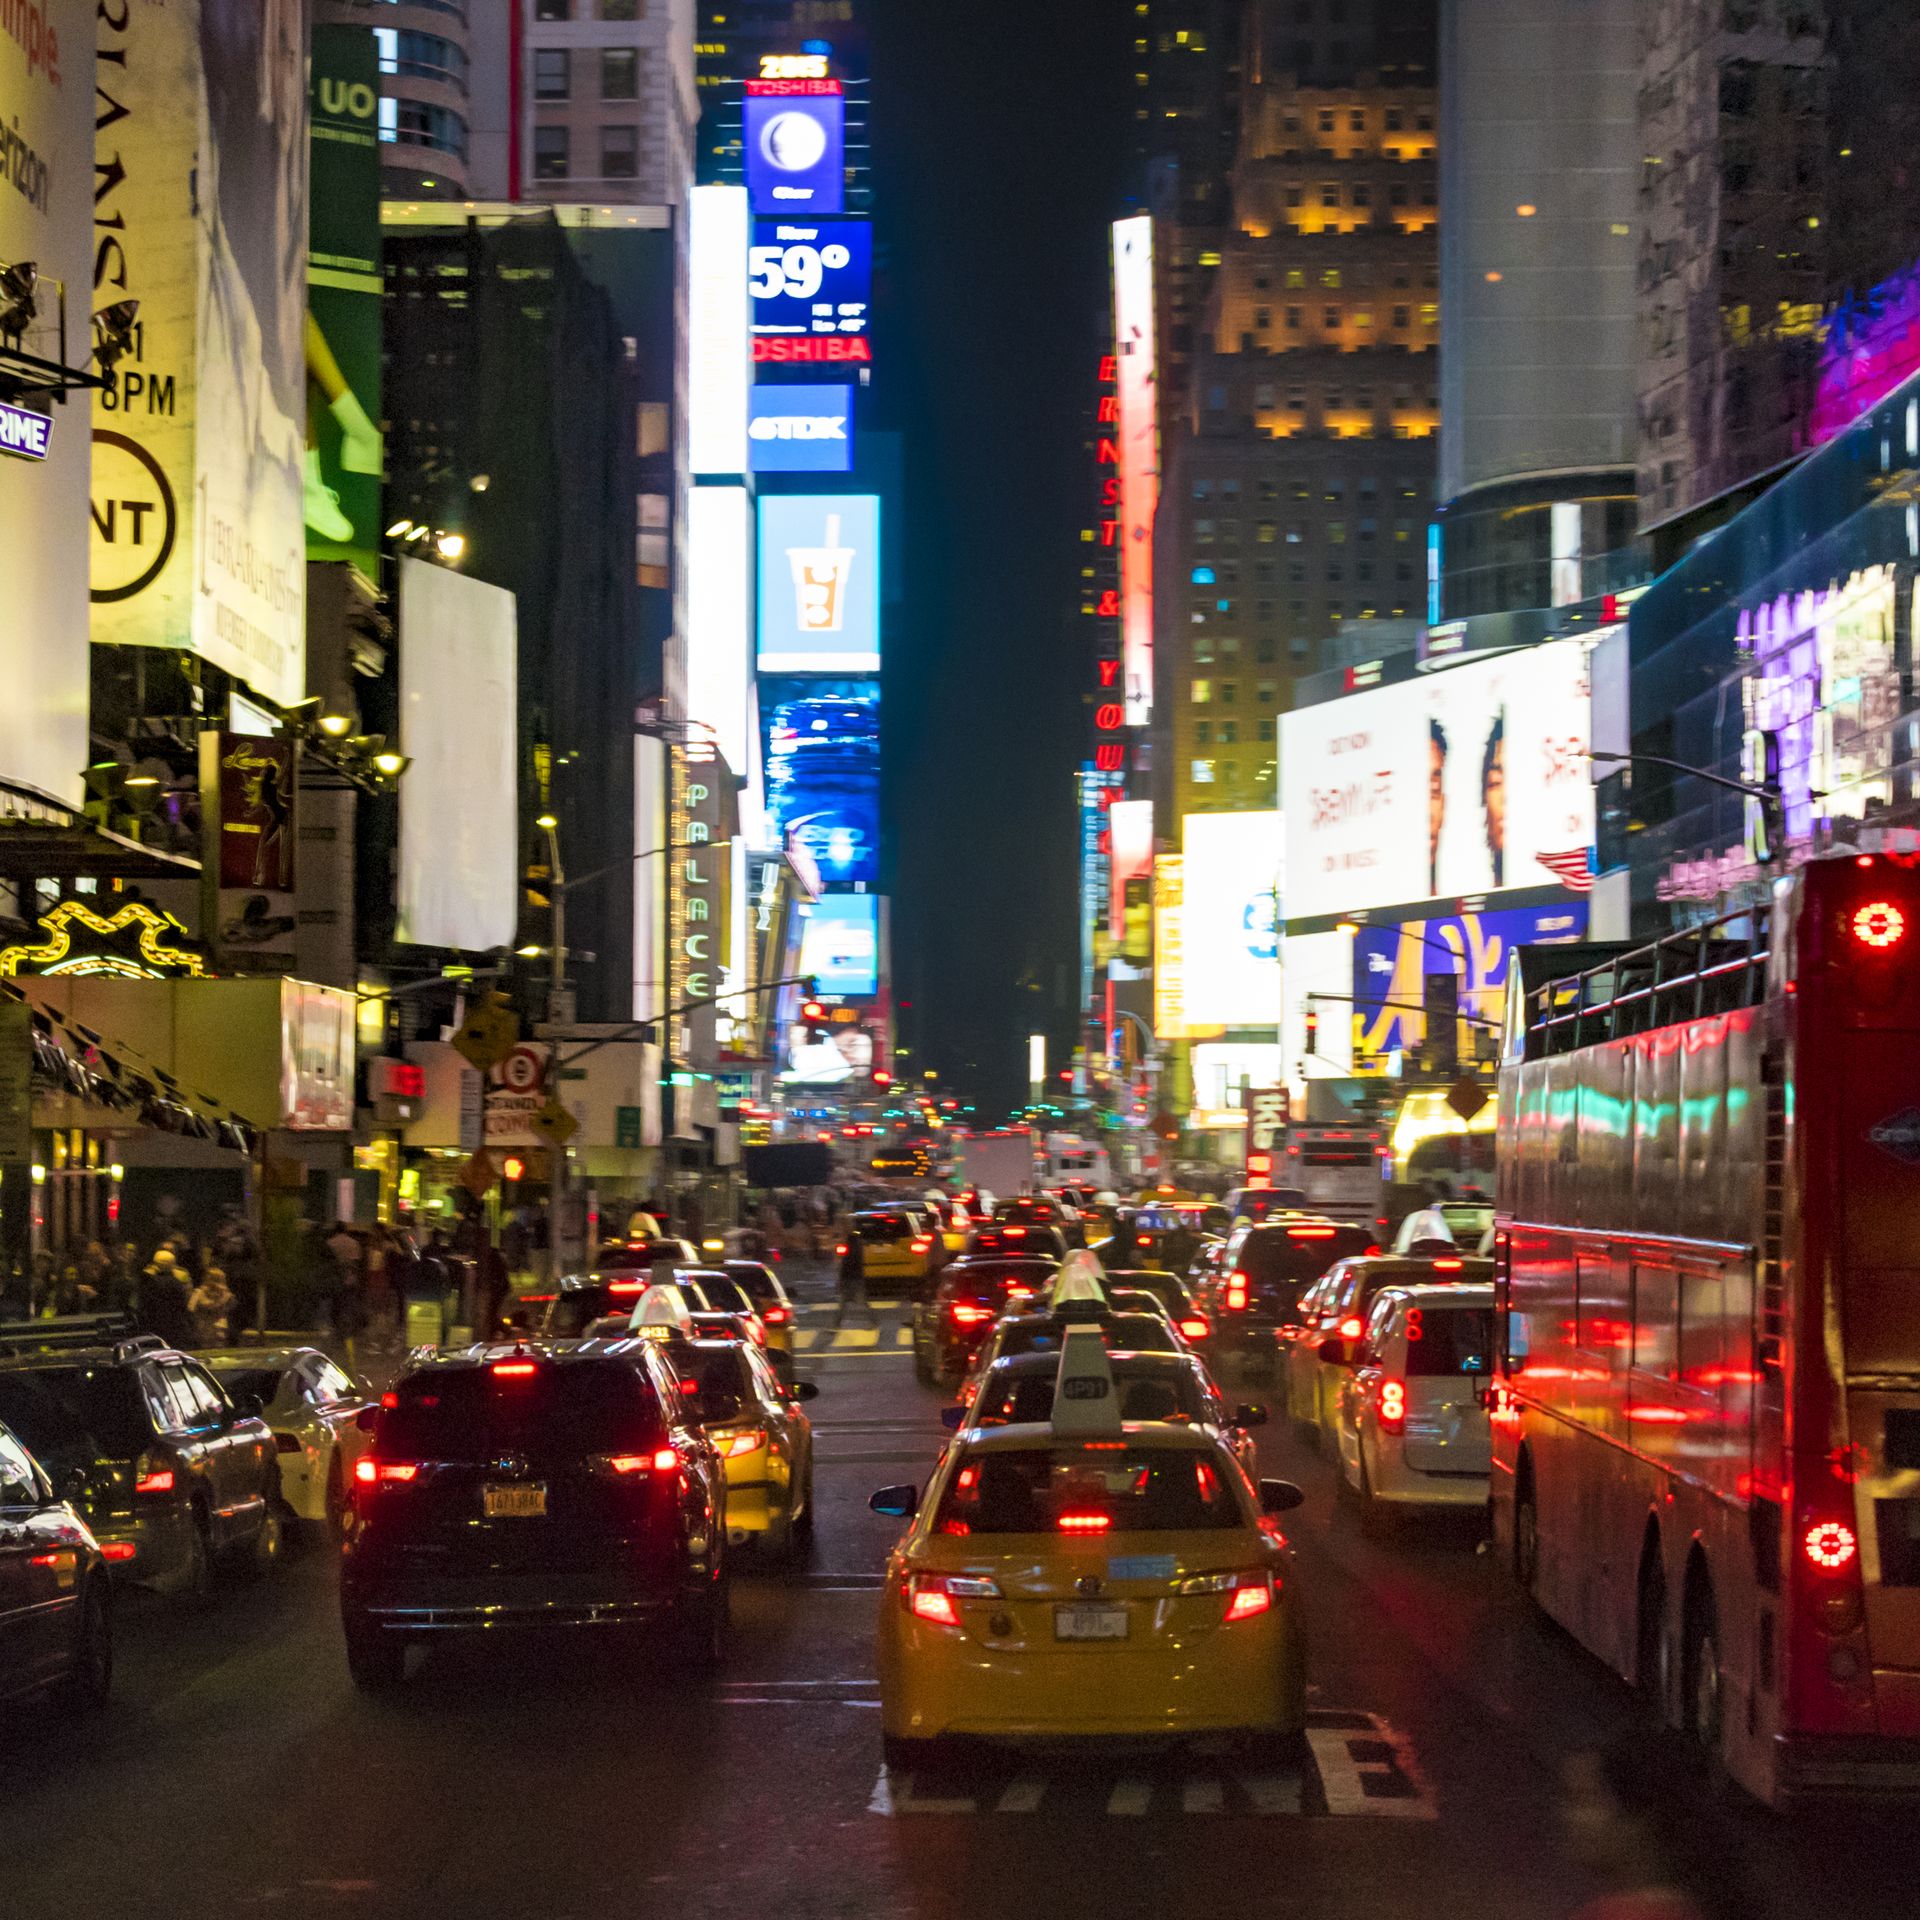 Night view of Times Square in New York City with cars in traffic